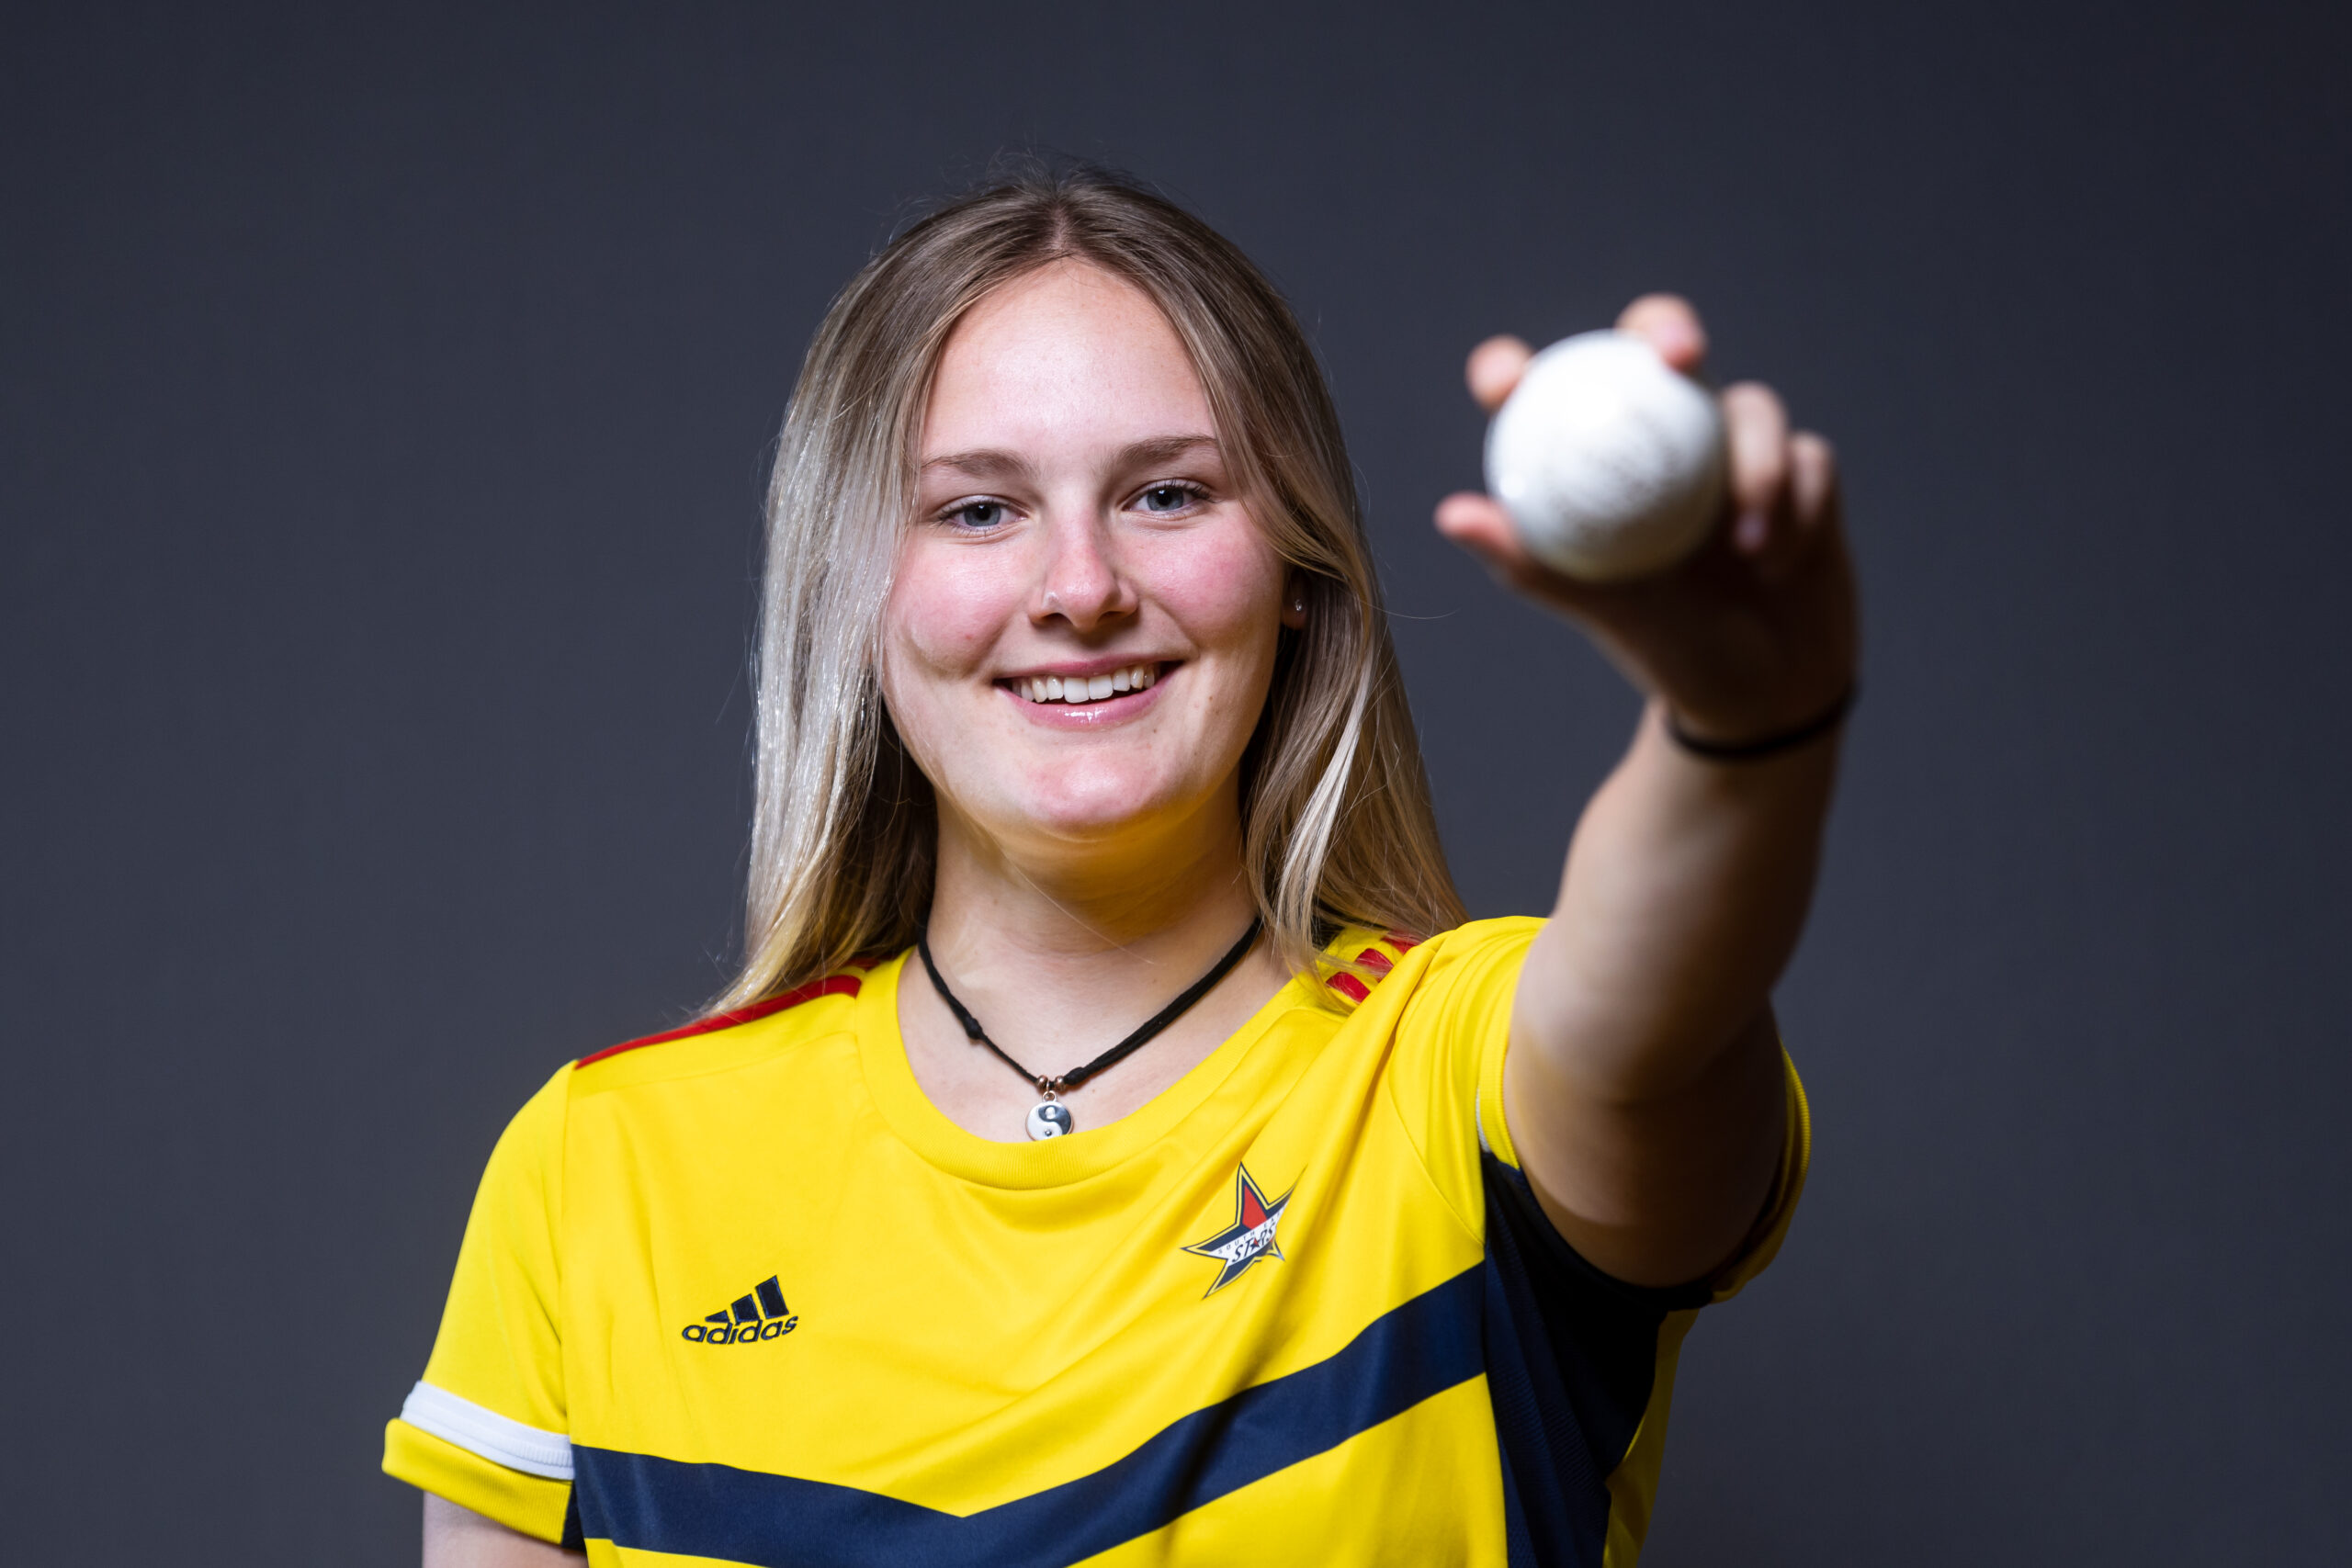 Tilly Corteen-Coleman takes four wickets in a row as Stars win